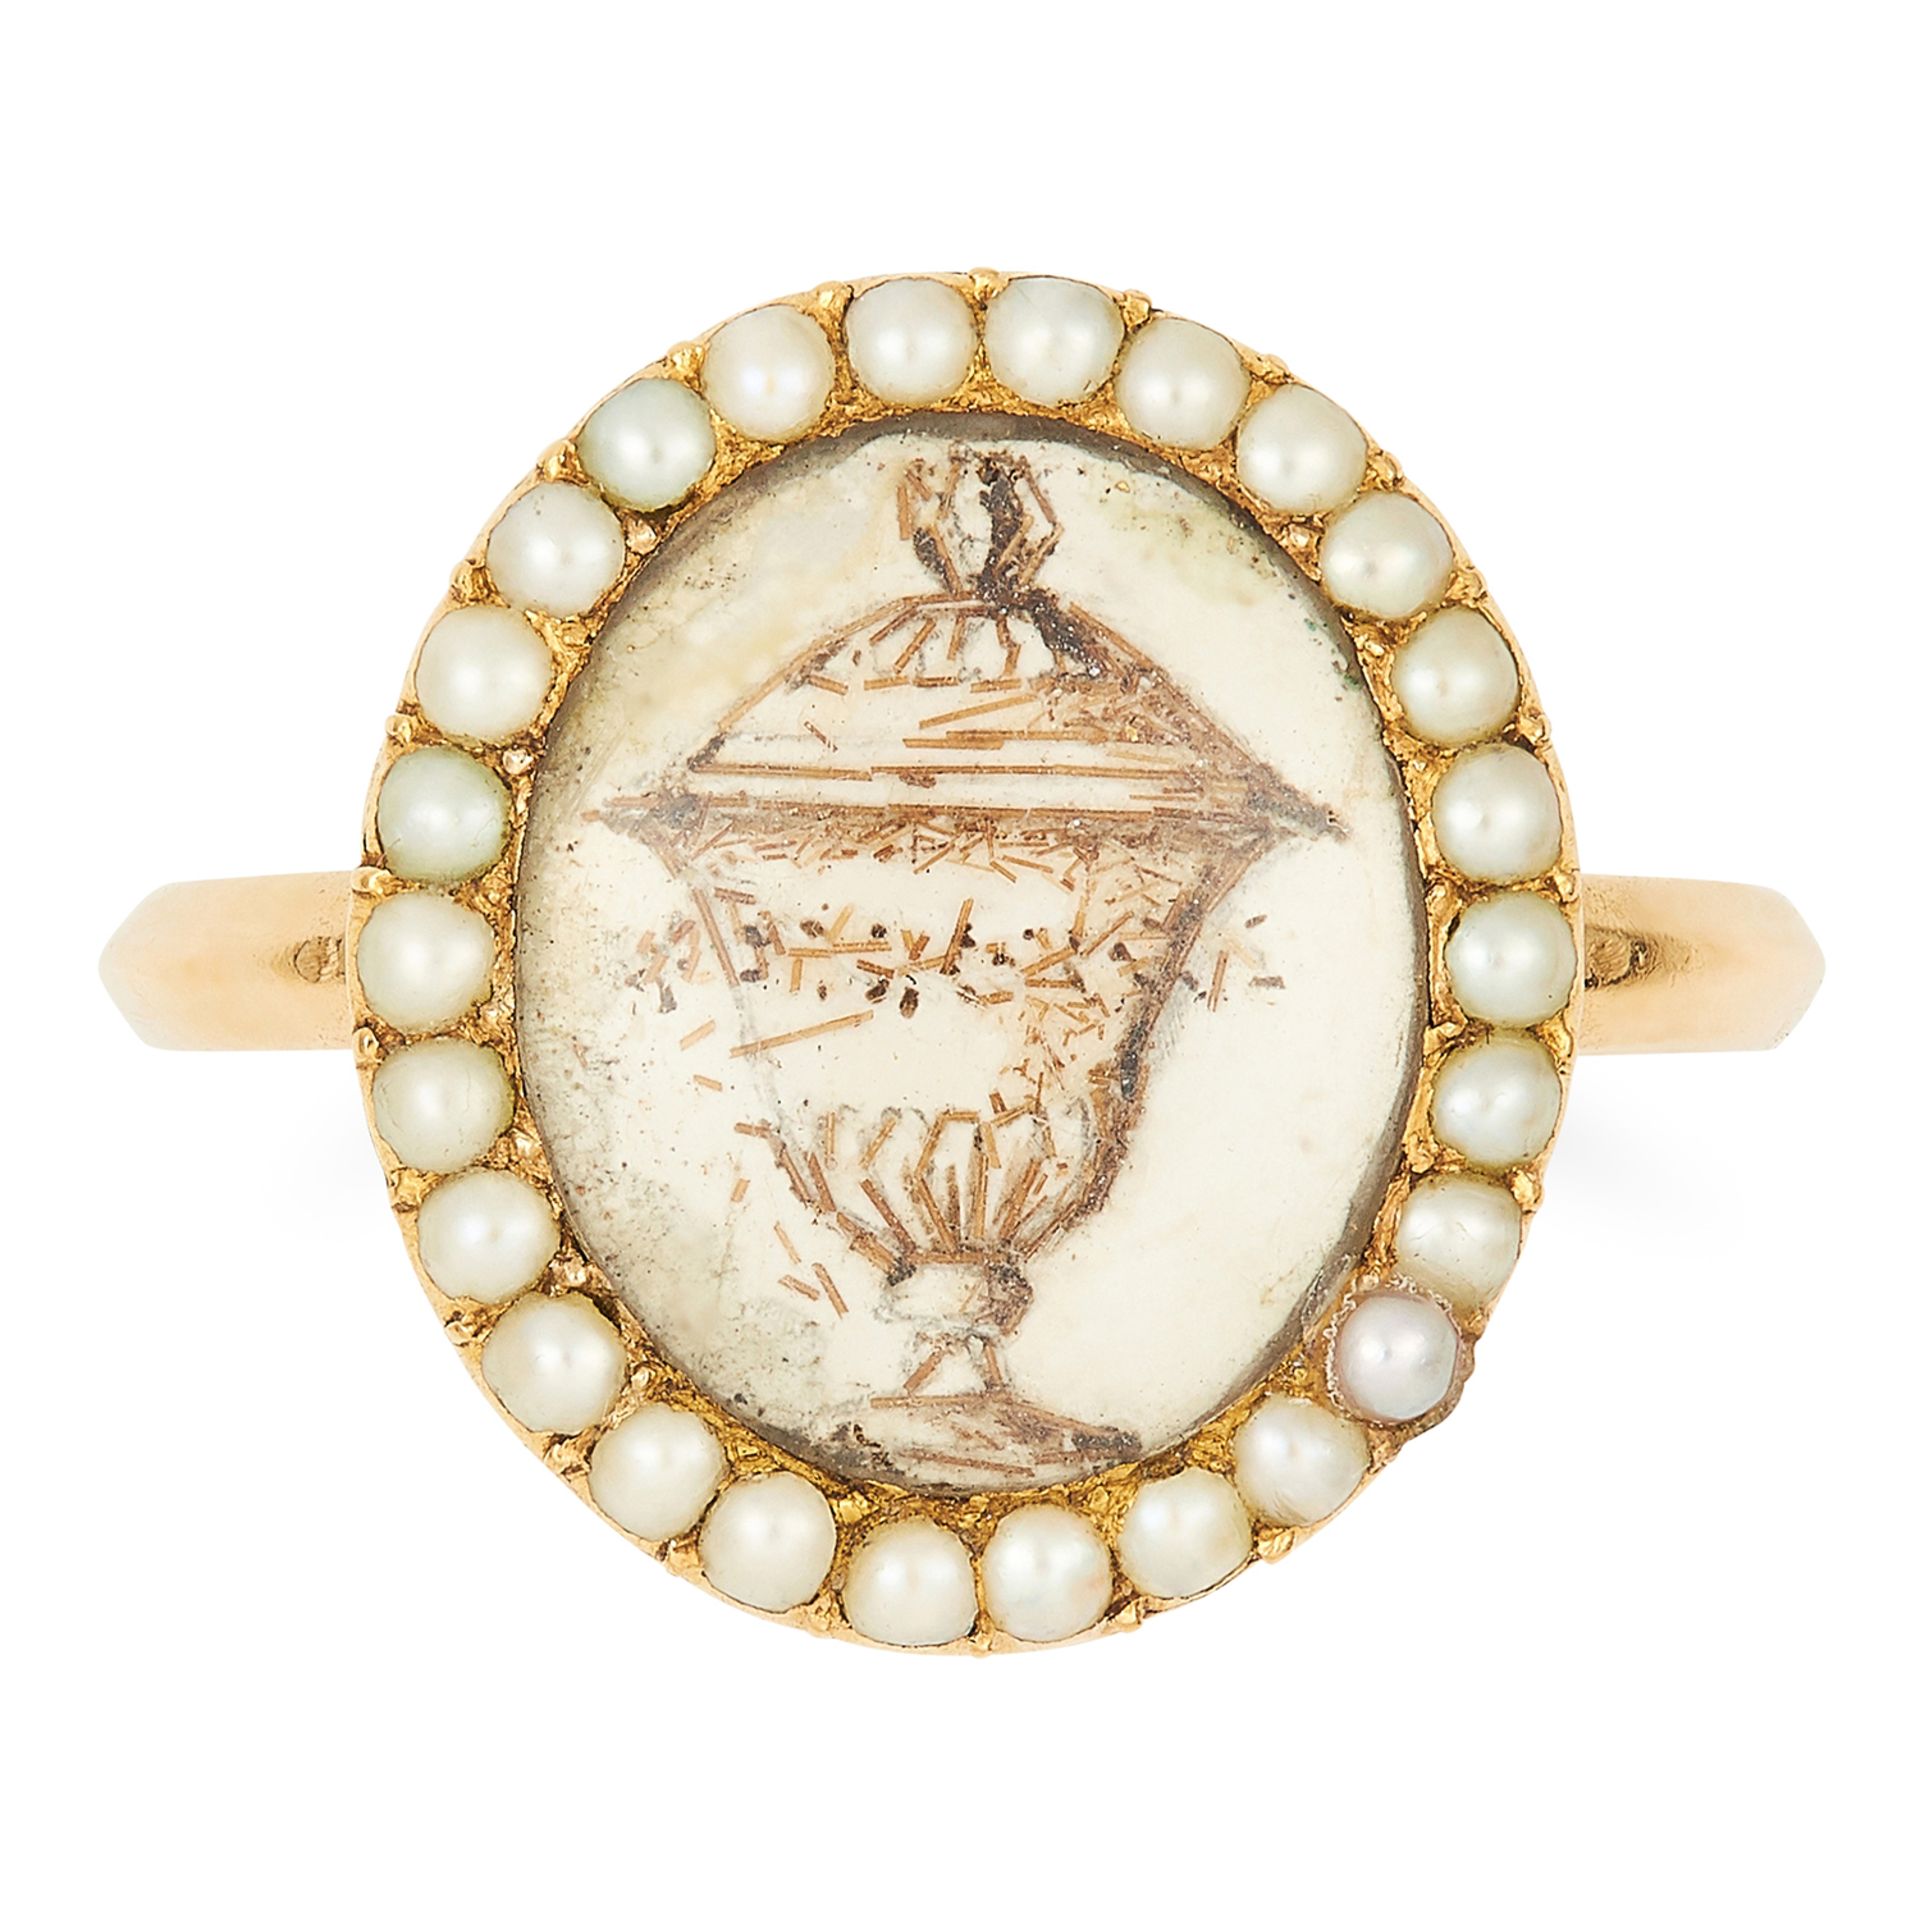 ANTIQUE GEORGIAN MINIATURE AND PEARL MOURNING RING, 18TH CENTURY in high carat yellow gold,